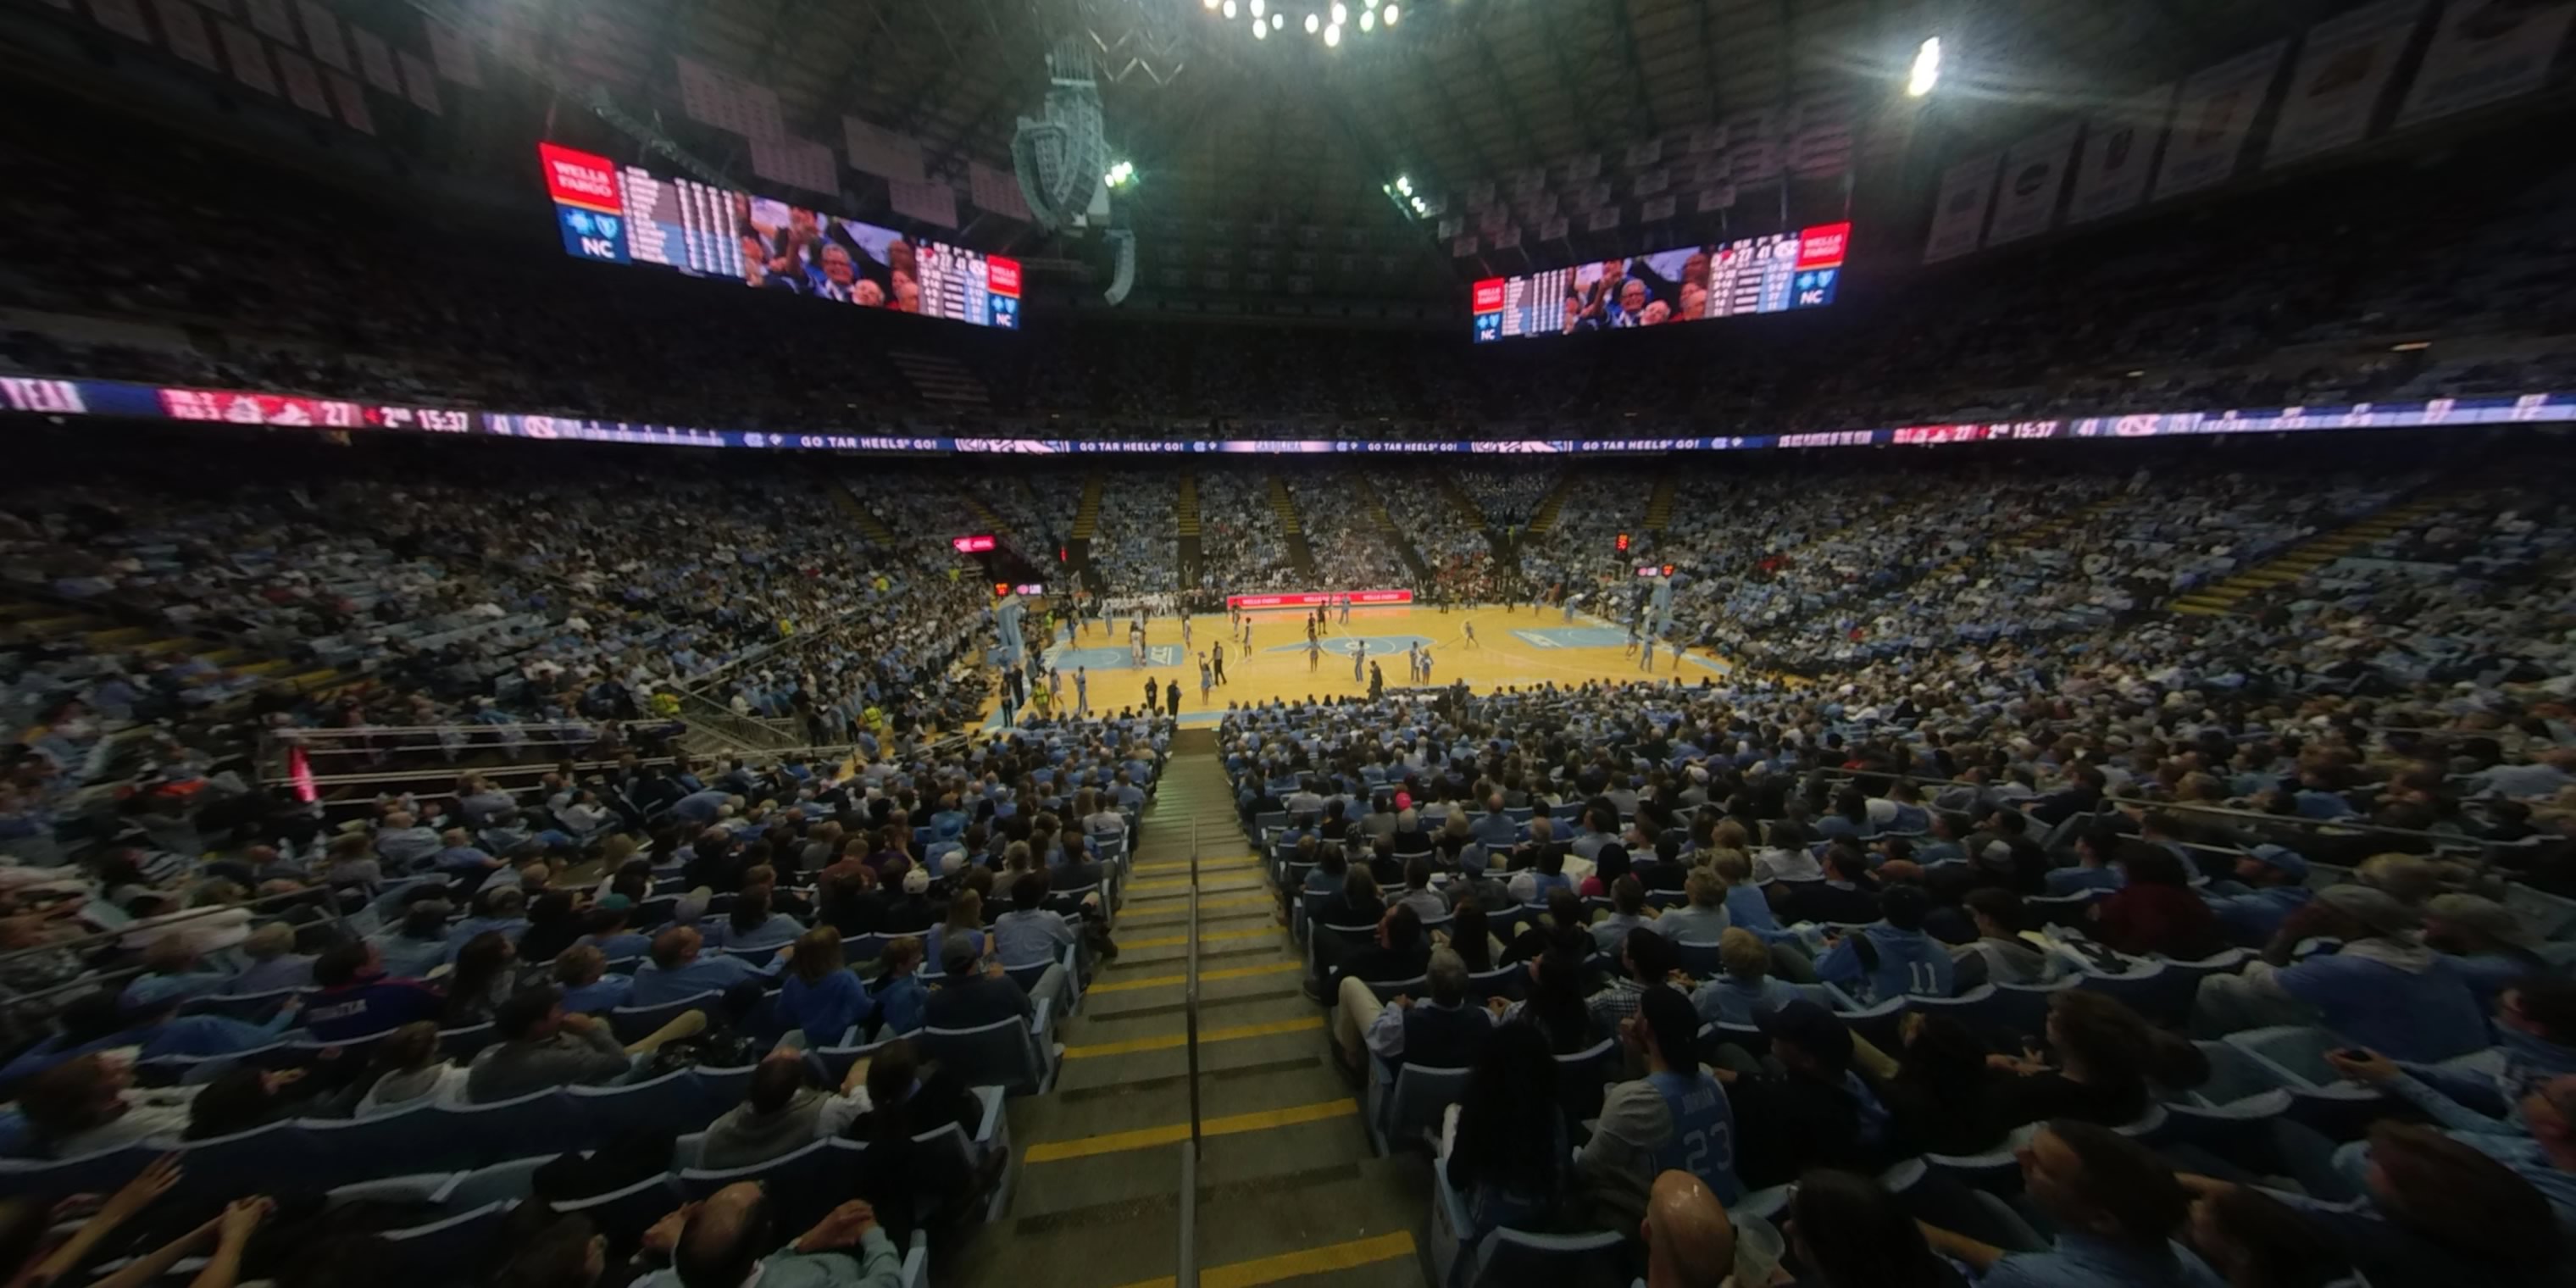 section 124 panoramic seat view  - dean smith center